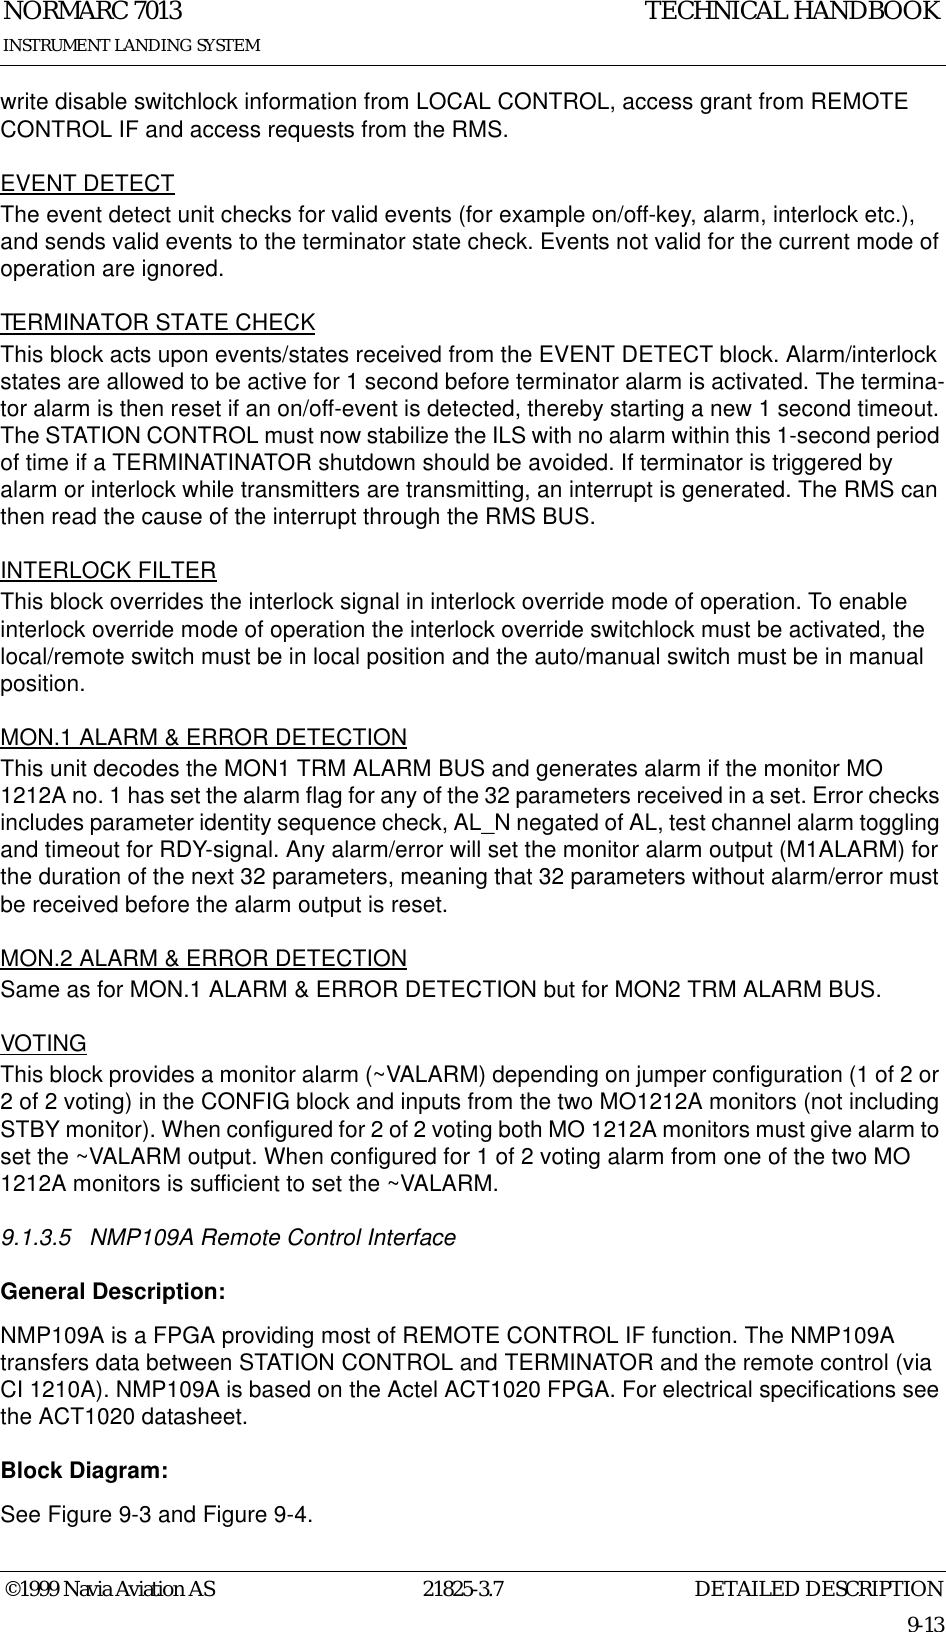 DETAILED DESCRIPTIONNORMARC 701321825-3.79-13INSTRUMENT LANDING SYSTEMTECHNICAL HANDBOOK©1999 Navia Aviation ASwrite disable switchlock information from LOCAL CONTROL, access grant from REMOTE CONTROL IF and access requests from the RMS.EVENT DETECTThe event detect unit checks for valid events (for example on/off-key, alarm, interlock etc.), and sends valid events to the terminator state check. Events not valid for the current mode of operation are ignored.TERMINATOR STATE CHECKThis block acts upon events/states received from the EVENT DETECT block. Alarm/interlock states are allowed to be active for 1 second before terminator alarm is activated. The termina-tor alarm is then reset if an on/off-event is detected, thereby starting a new 1 second timeout. The STATION CONTROL must now stabilize the ILS with no alarm within this 1-second period of time if a TERMINATINATOR shutdown should be avoided. If terminator is triggered by alarm or interlock while transmitters are transmitting, an interrupt is generated. The RMS can then read the cause of the interrupt through the RMS BUS.INTERLOCK FILTERThis block overrides the interlock signal in interlock override mode of operation. To enable interlock override mode of operation the interlock override switchlock must be activated, the local/remote switch must be in local position and the auto/manual switch must be in manual position.MON.1 ALARM &amp; ERROR DETECTIONThis unit decodes the MON1 TRM ALARM BUS and generates alarm if the monitor MO 1212A no. 1 has set the alarm flag for any of the 32 parameters received in a set. Error checks includes parameter identity sequence check, AL_N negated of AL, test channel alarm toggling and timeout for RDY-signal. Any alarm/error will set the monitor alarm output (M1ALARM) for the duration of the next 32 parameters, meaning that 32 parameters without alarm/error must be received before the alarm output is reset.MON.2 ALARM &amp; ERROR DETECTIONSame as for MON.1 ALARM &amp; ERROR DETECTION but for MON2 TRM ALARM BUS.VOTINGThis block provides a monitor alarm (~VALARM) depending on jumper configuration (1 of 2 or 2 of 2 voting) in the CONFIG block and inputs from the two MO1212A monitors (not including STBY monitor). When configured for 2 of 2 voting both MO 1212A monitors must give alarm to set the ~VALARM output. When configured for 1 of 2 voting alarm from one of the two MO 1212A monitors is sufficient to set the ~VALARM.9.1.3.5 NMP109A Remote Control InterfaceGeneral Description:NMP109A is a FPGA providing most of REMOTE CONTROL IF function. The NMP109A transfers data between STATION CONTROL and TERMINATOR and the remote control (via CI 1210A). NMP109A is based on the Actel ACT1020 FPGA. For electrical specifications see the ACT1020 datasheet.Block Diagram:See Figure 9-3 and Figure 9-4.